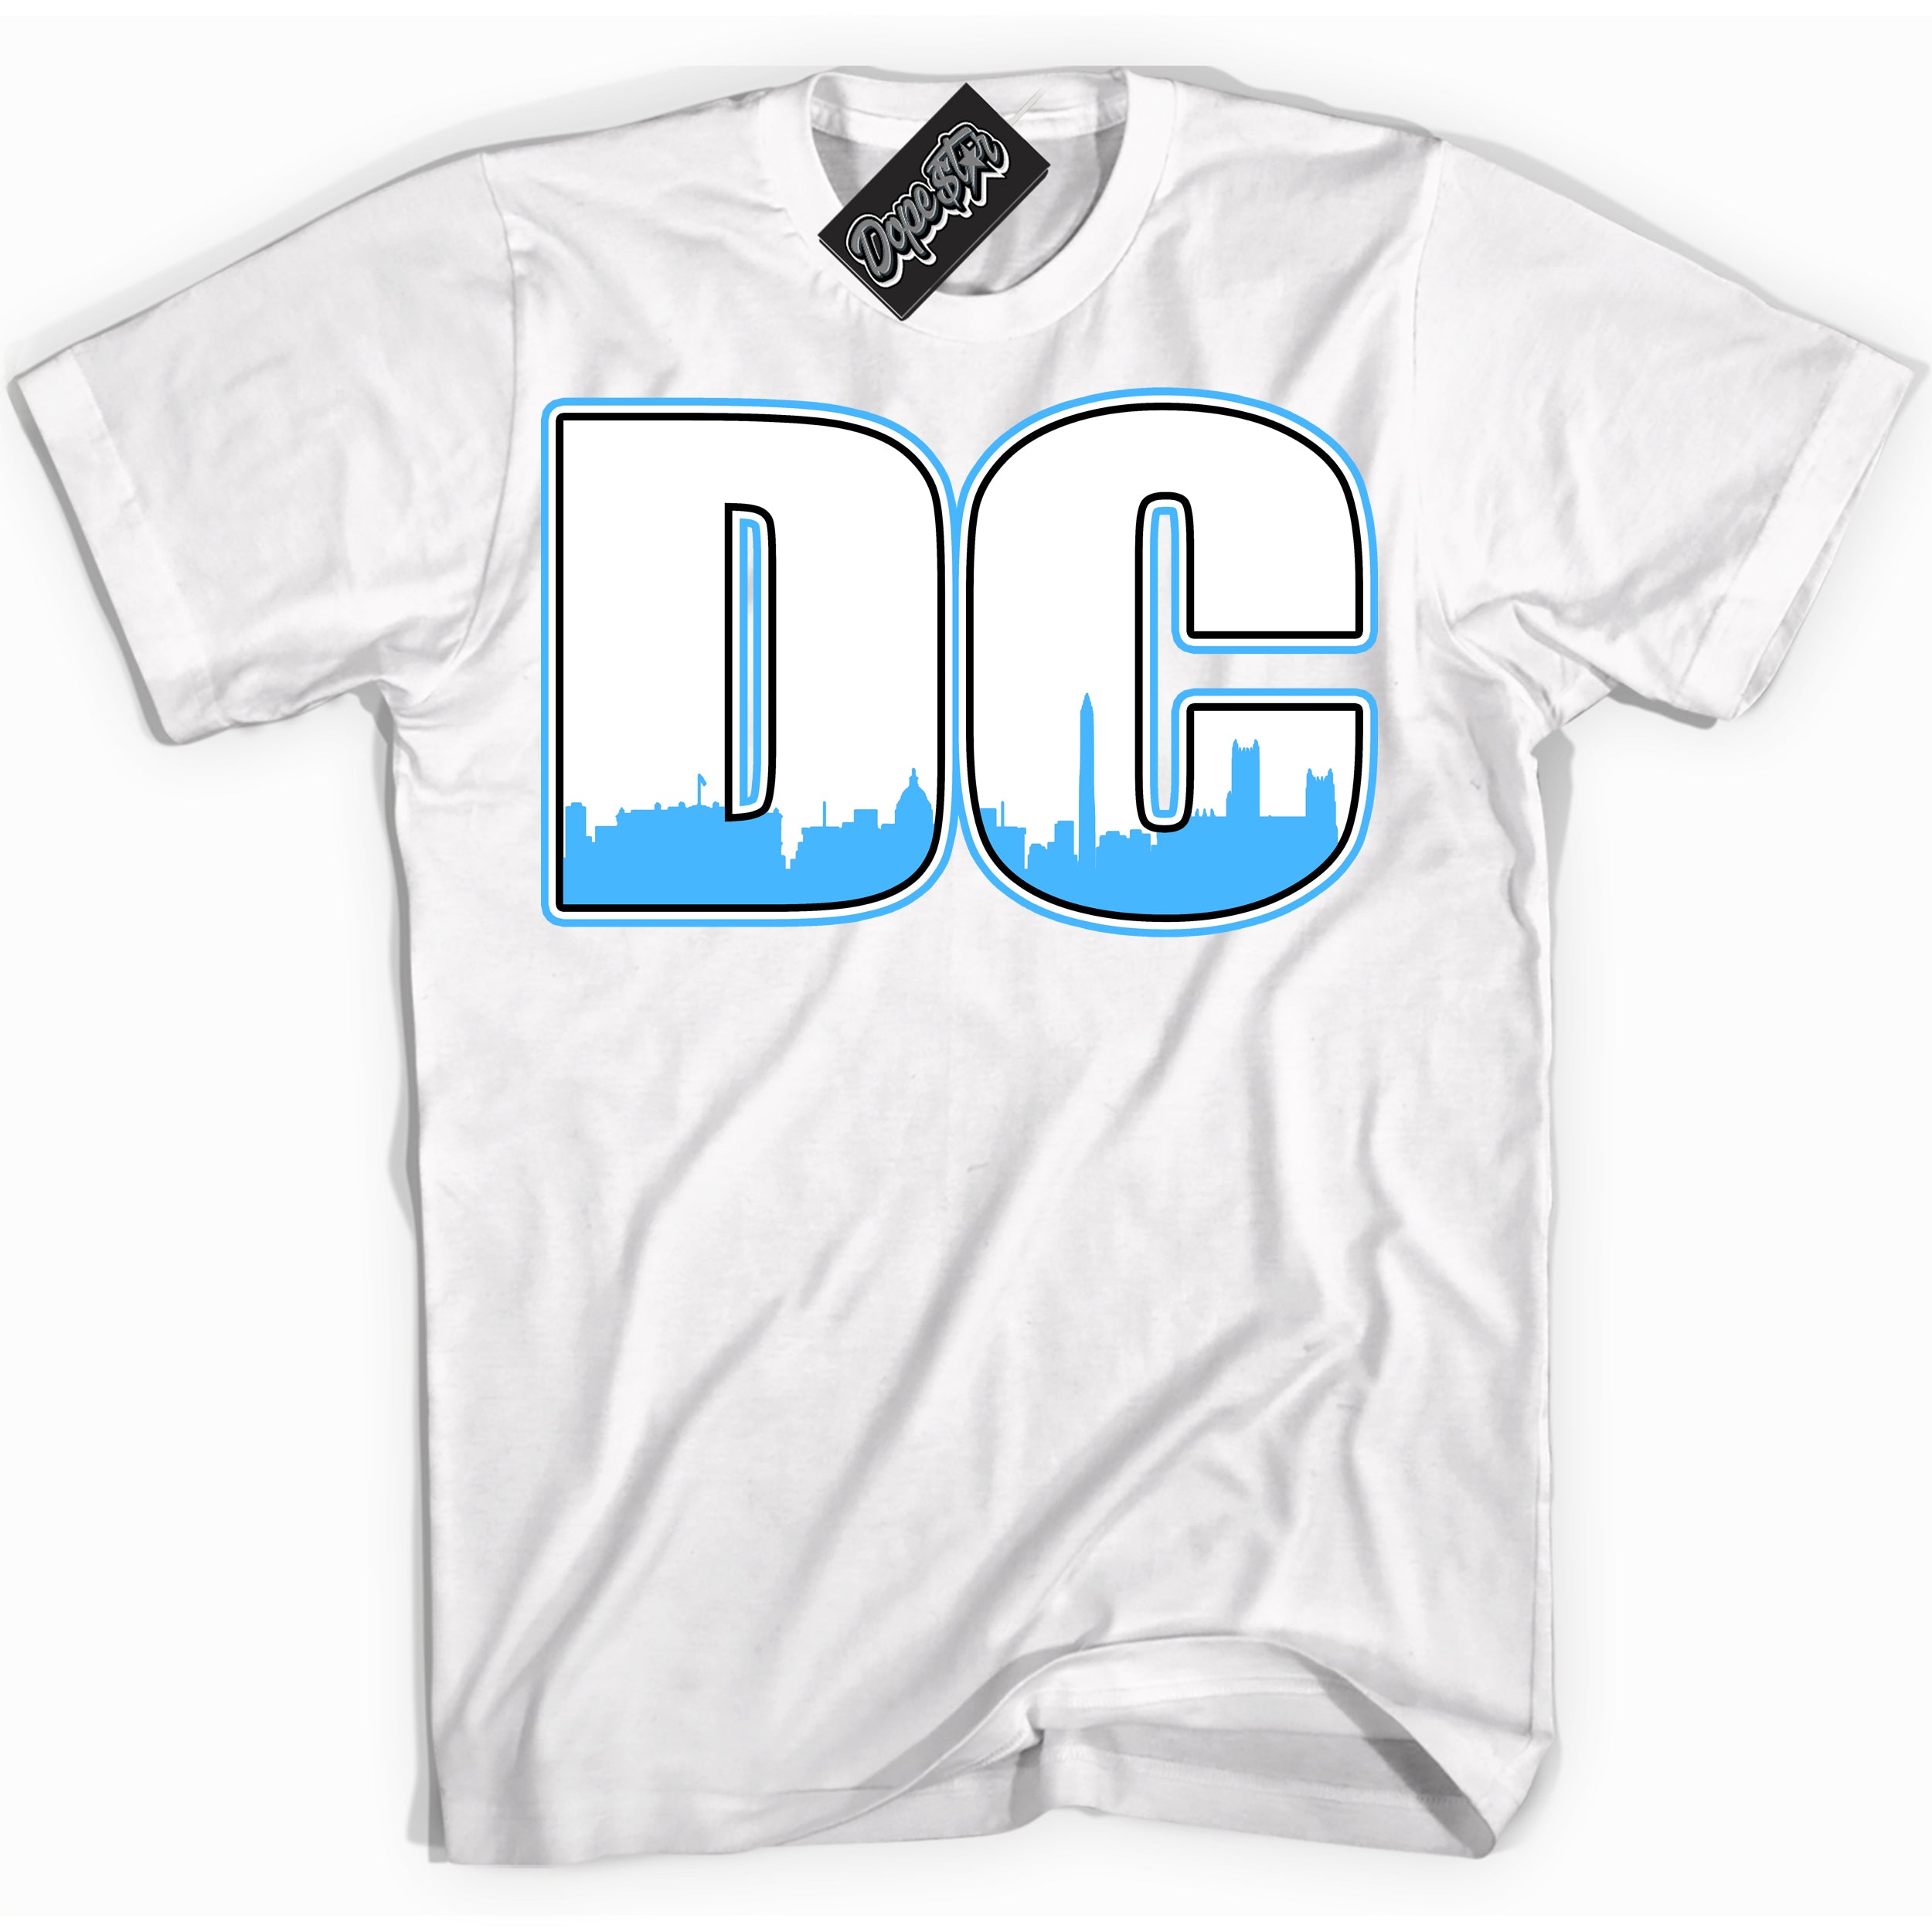 Cool White graphic tee with “ DC ” design, that perfectly matches Powder Blue 9s sneakers 